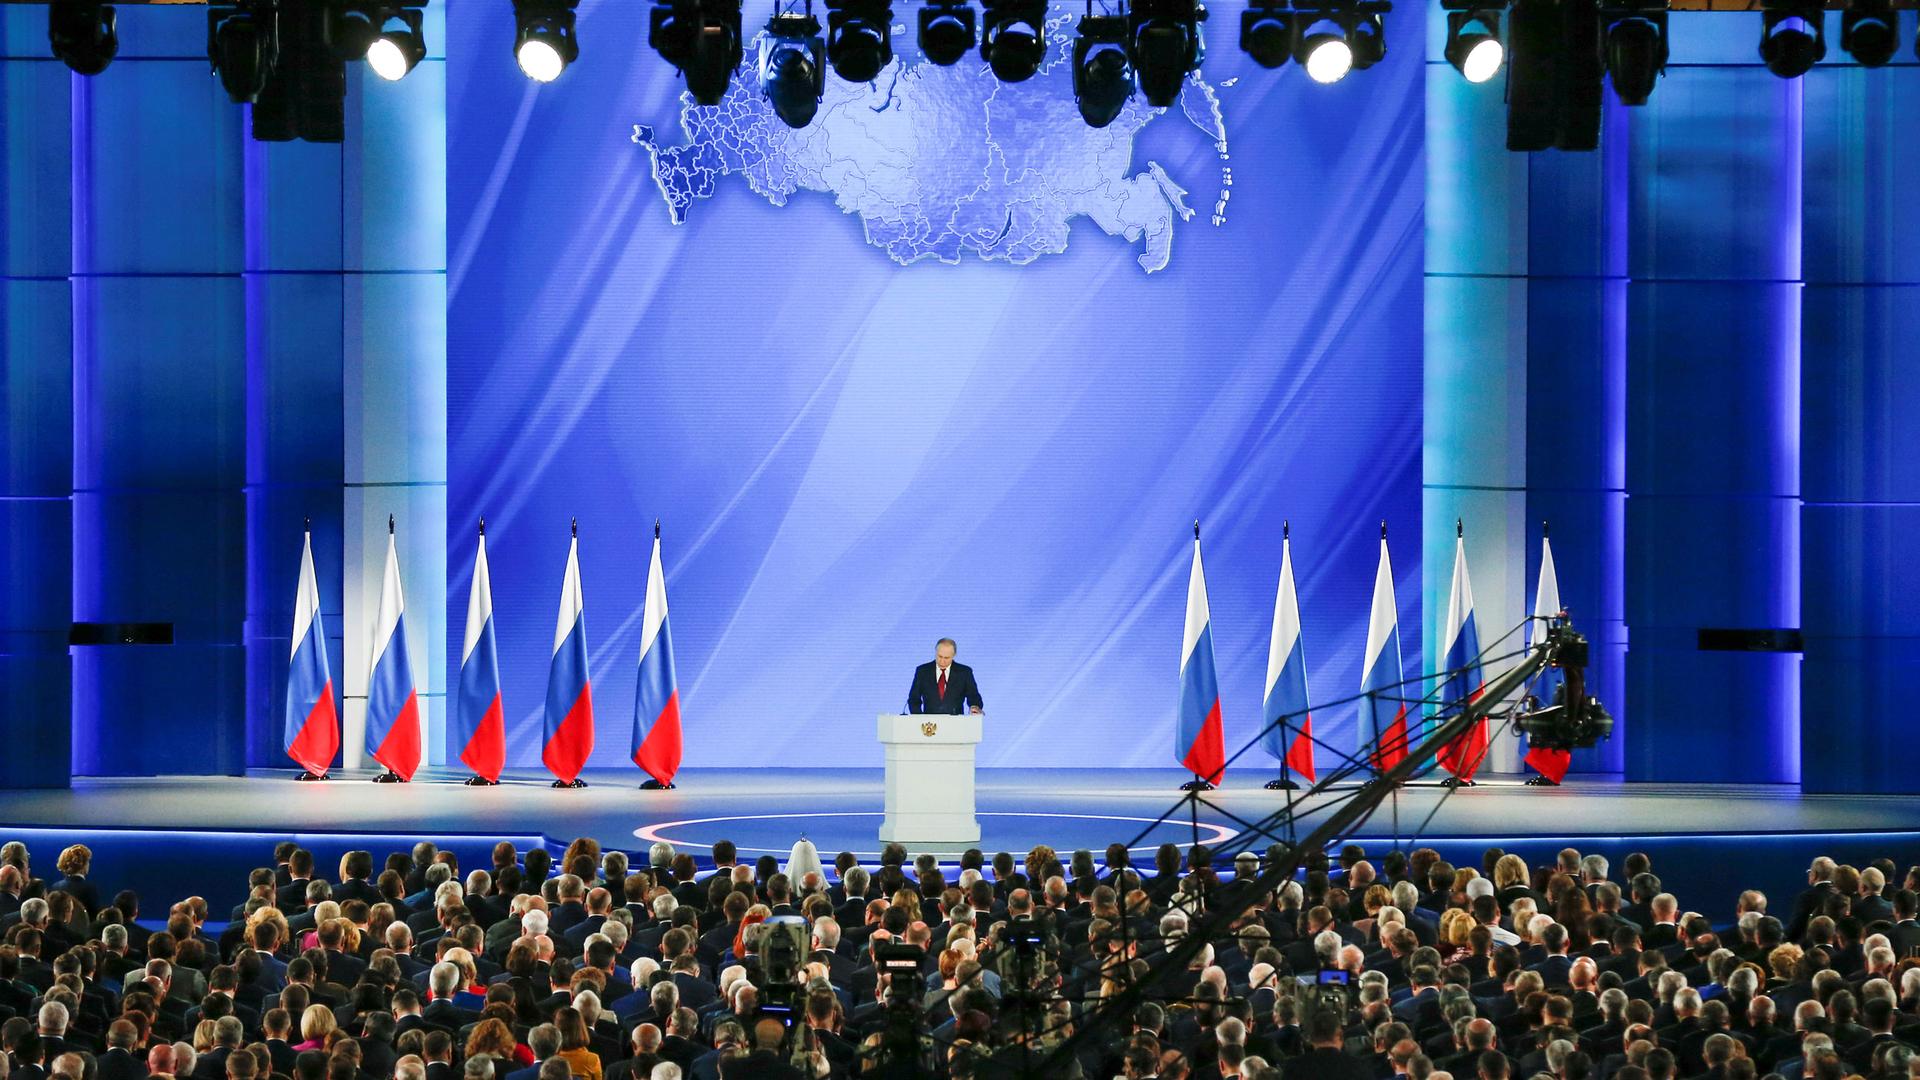 Russian President Vladimir Putin is shown standing on a large stage with several Russian flags behind him.